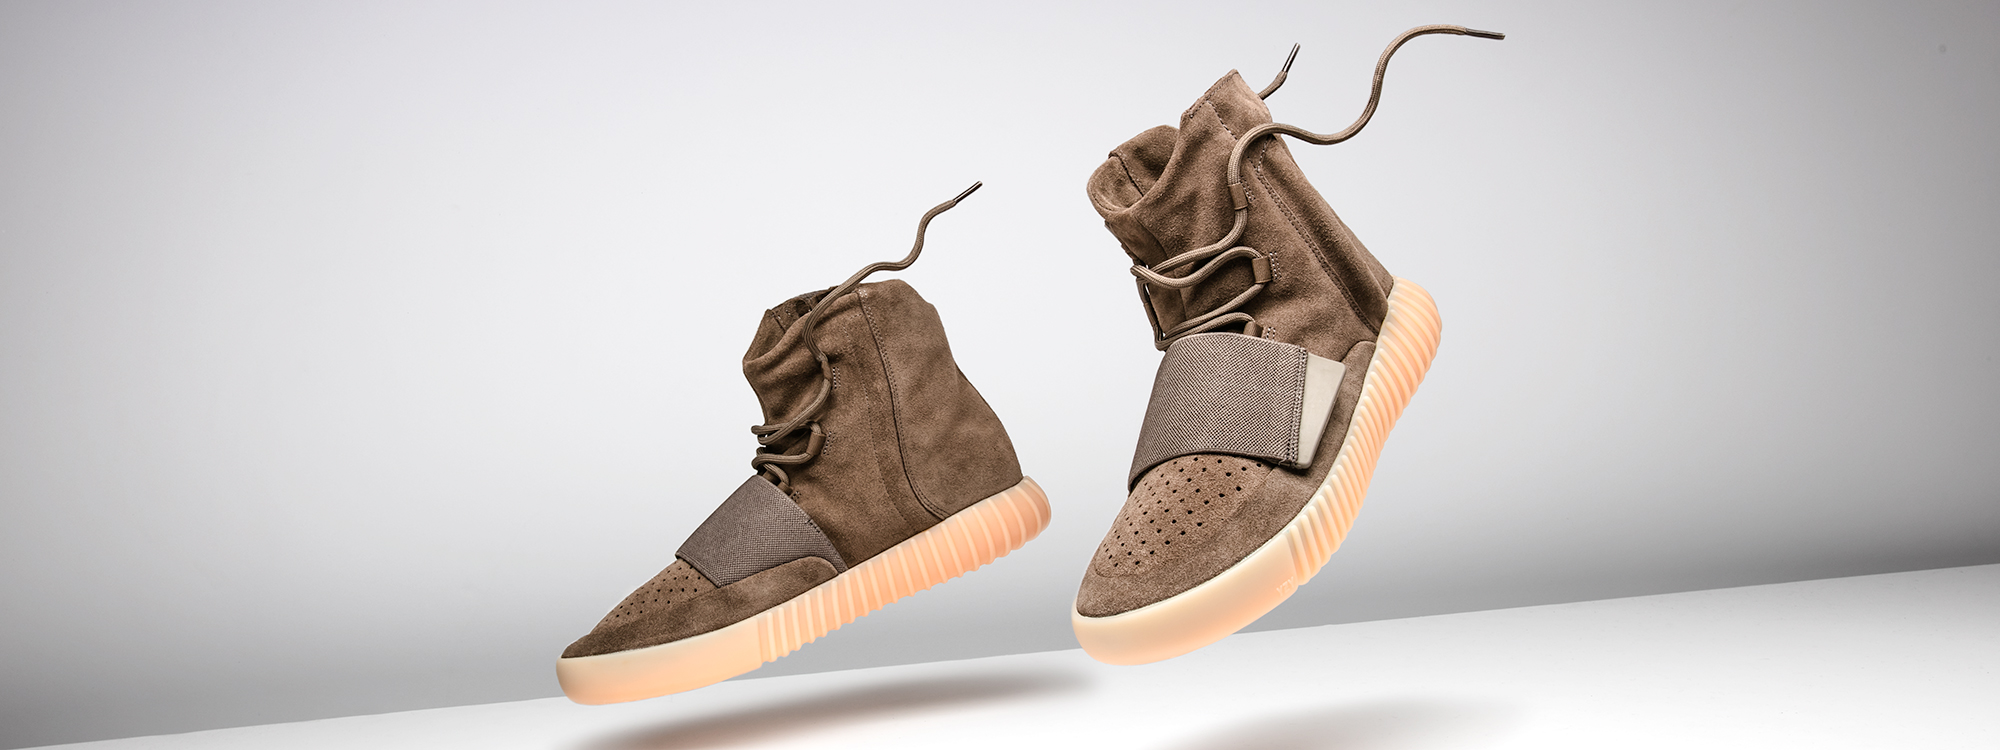  Yeezy Boost 750  Light Brown / Chocolate kids outfit